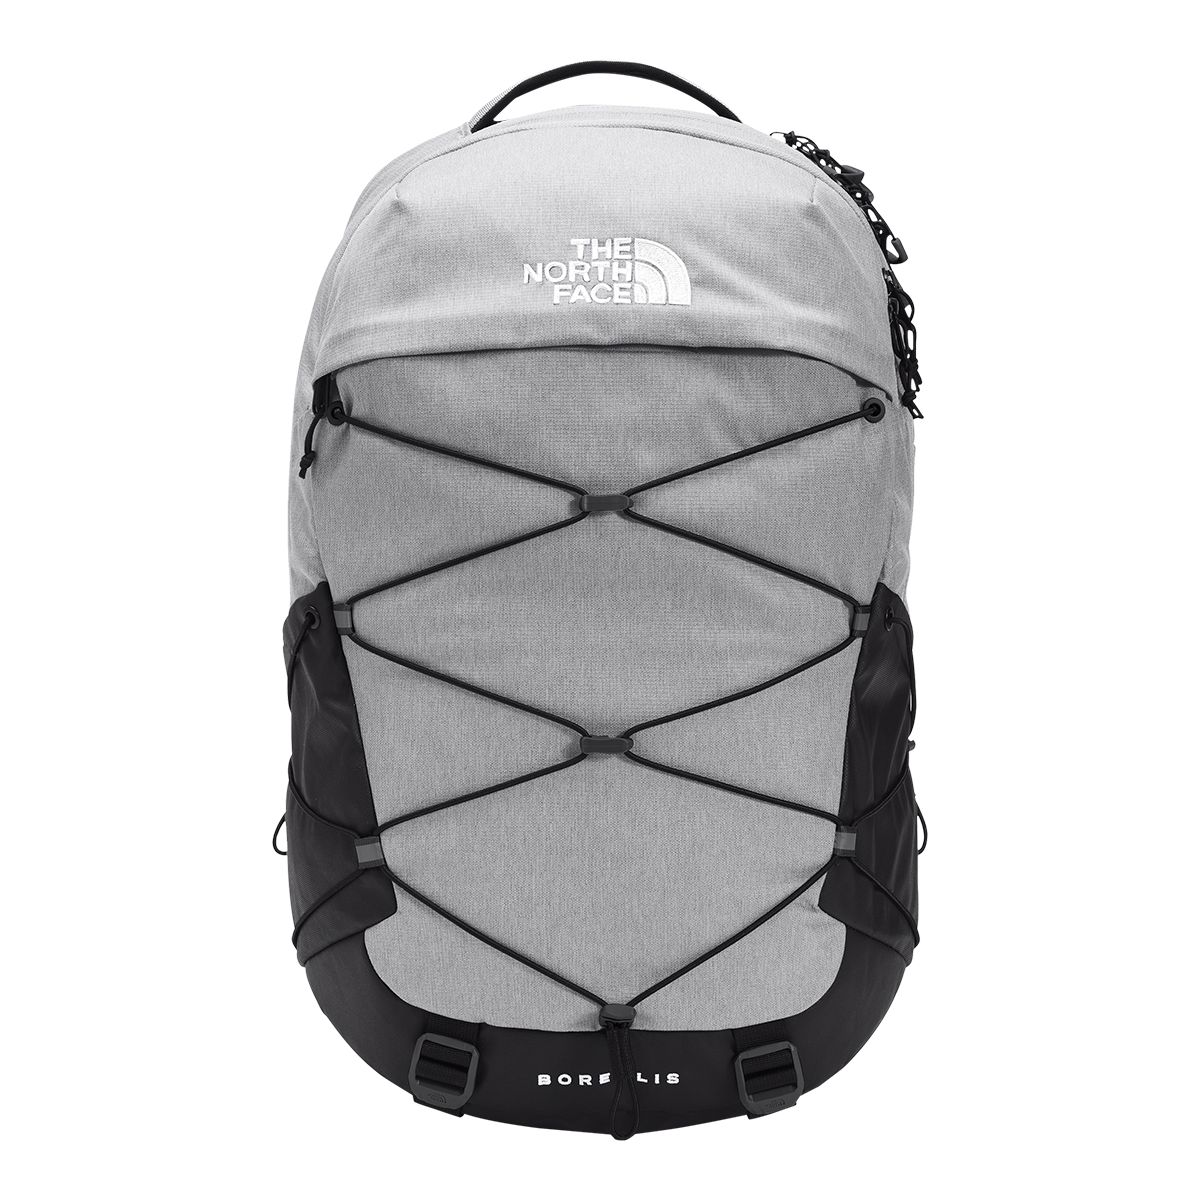 Image of The North Face Borealis 28L Backpack